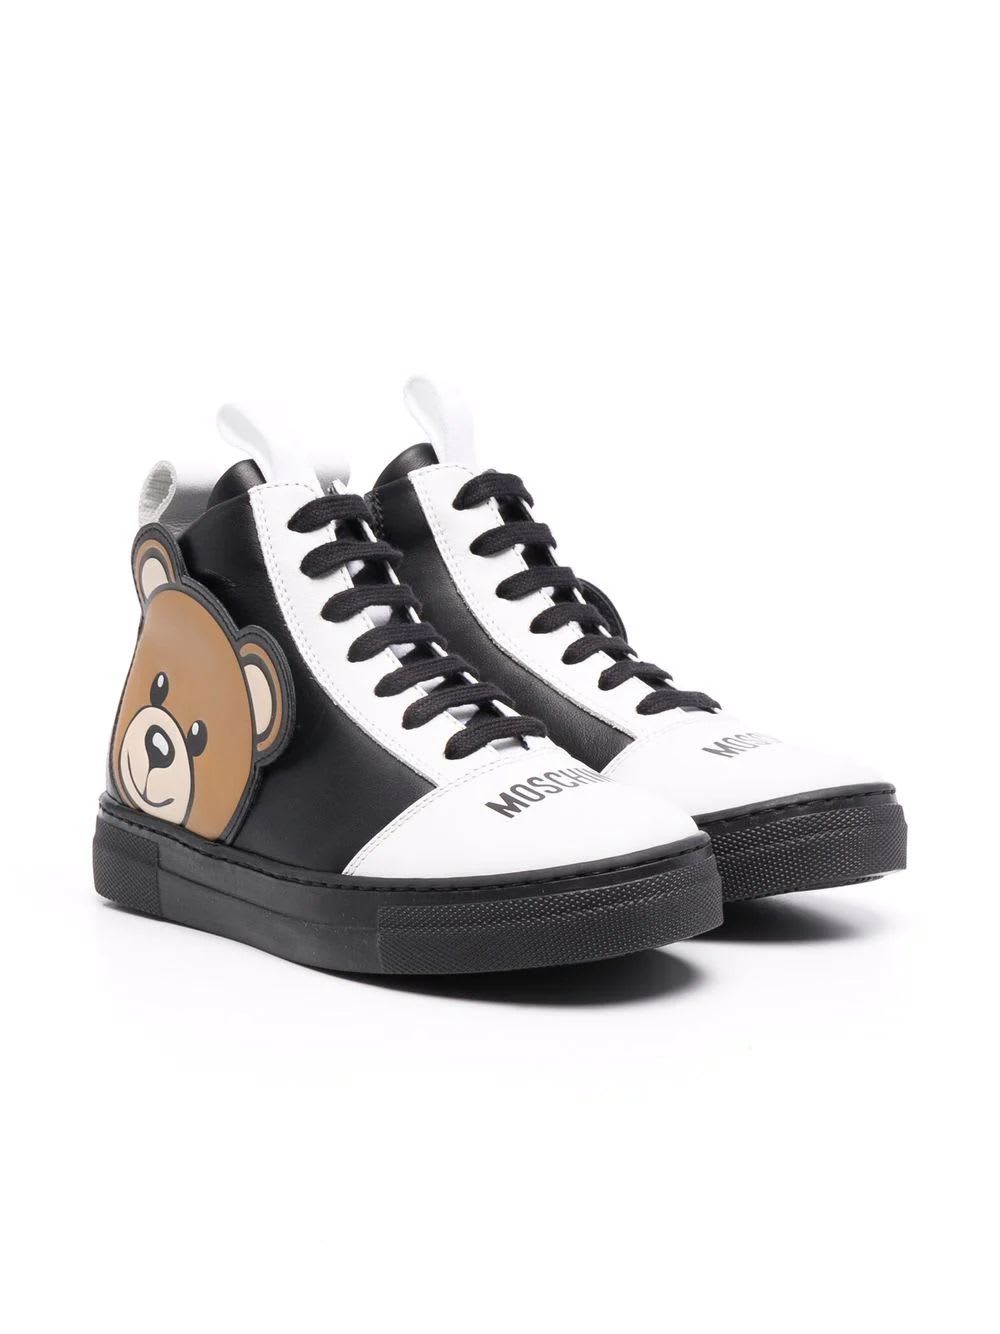 Moschino High Sneakers With Application